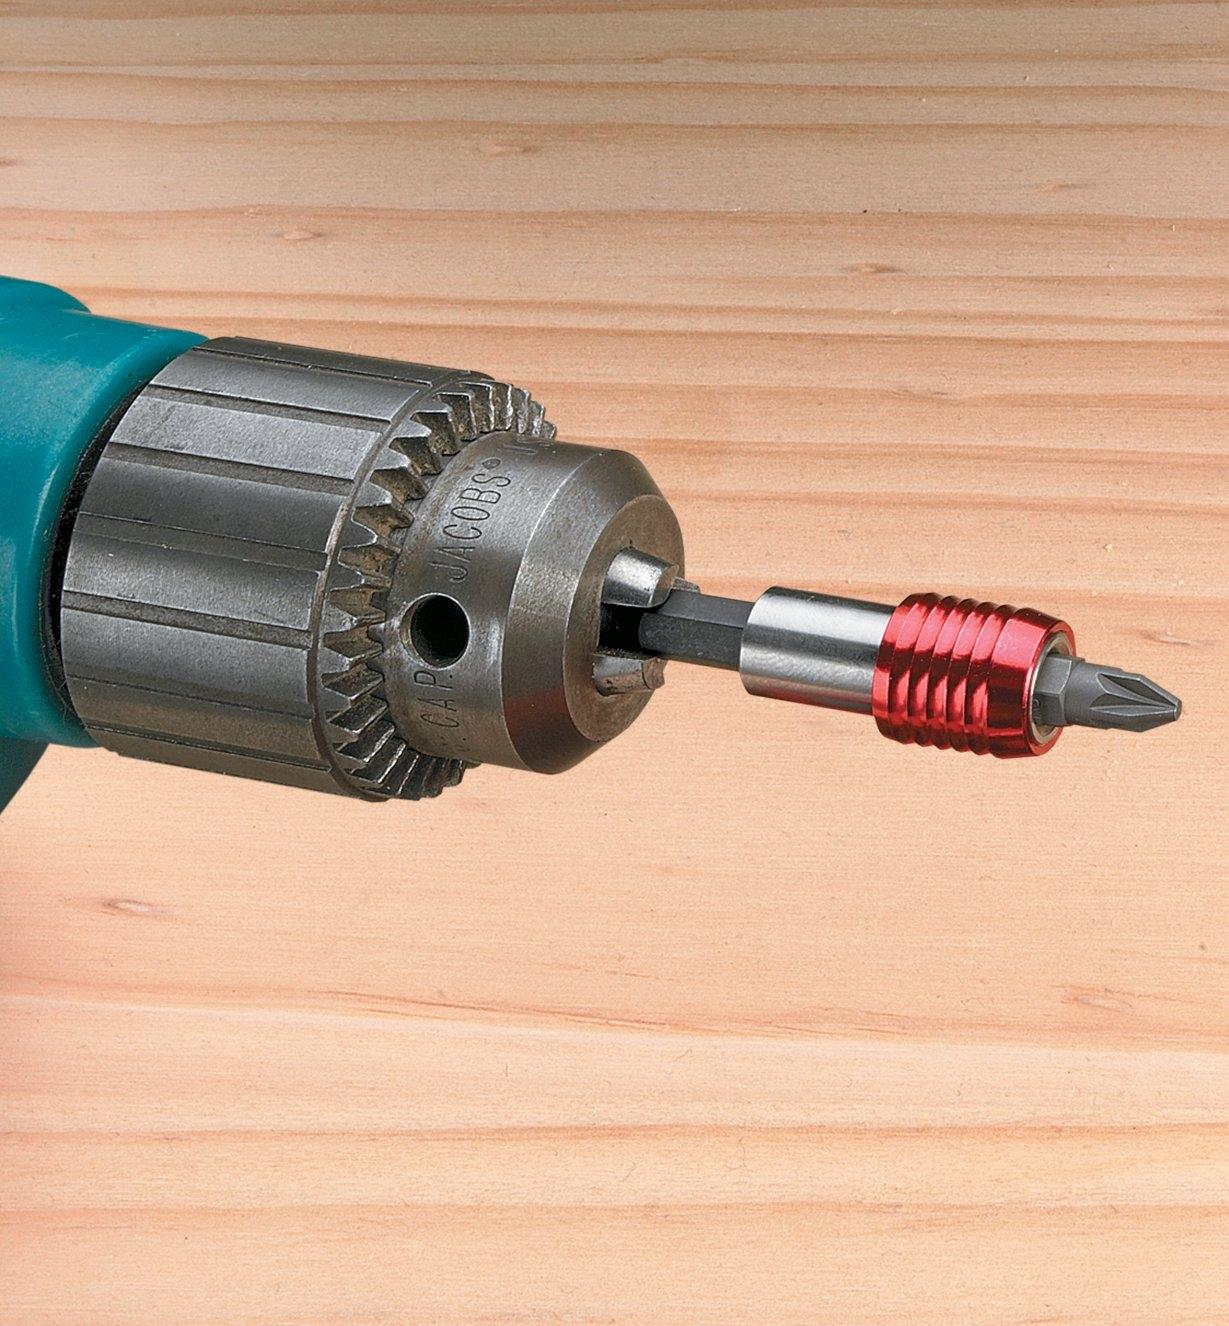 Universal adapter and bit chucked into a drill